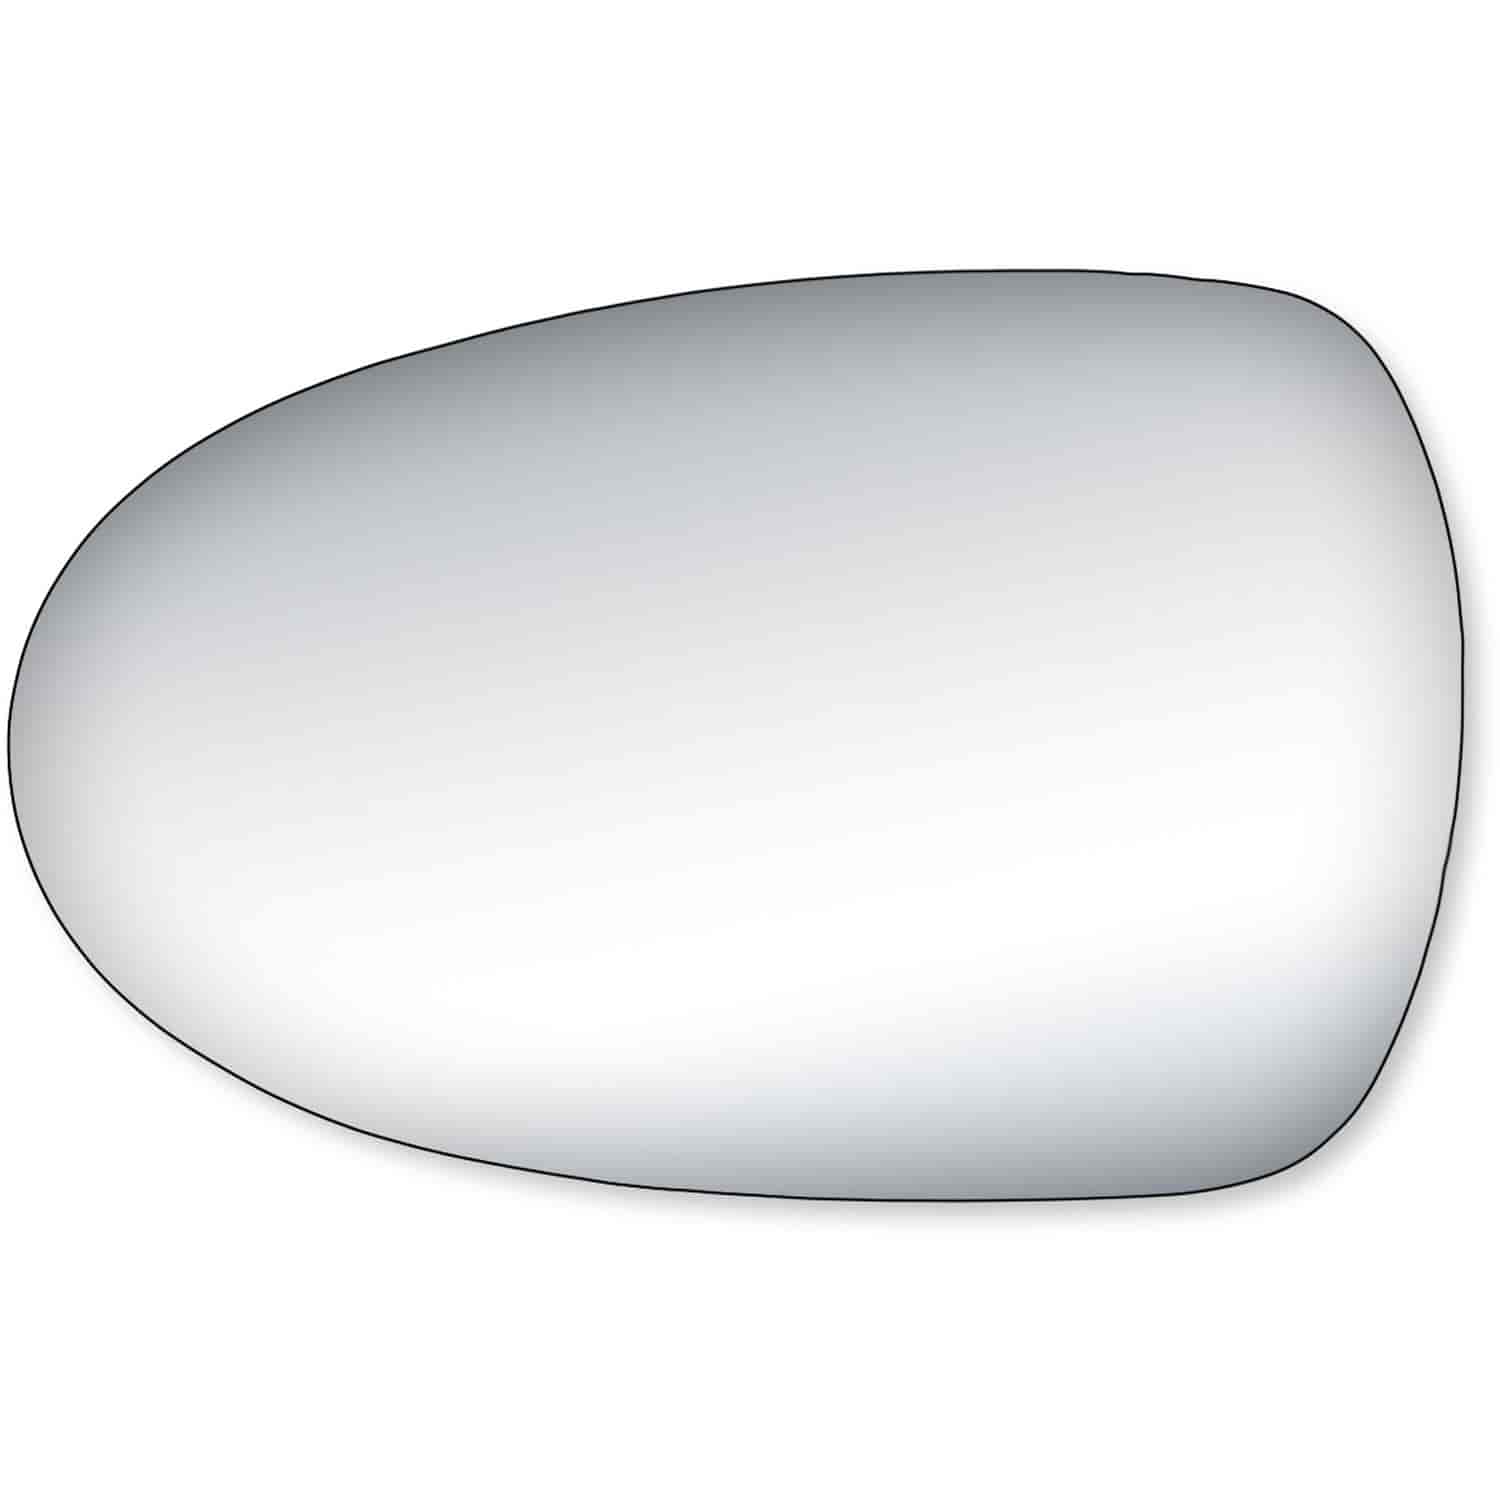 Replacement Glass for 95-99 Sentra Sedan; 95-99 200SX the glass measures 4 3/8 tall by 6 7/8 wide an